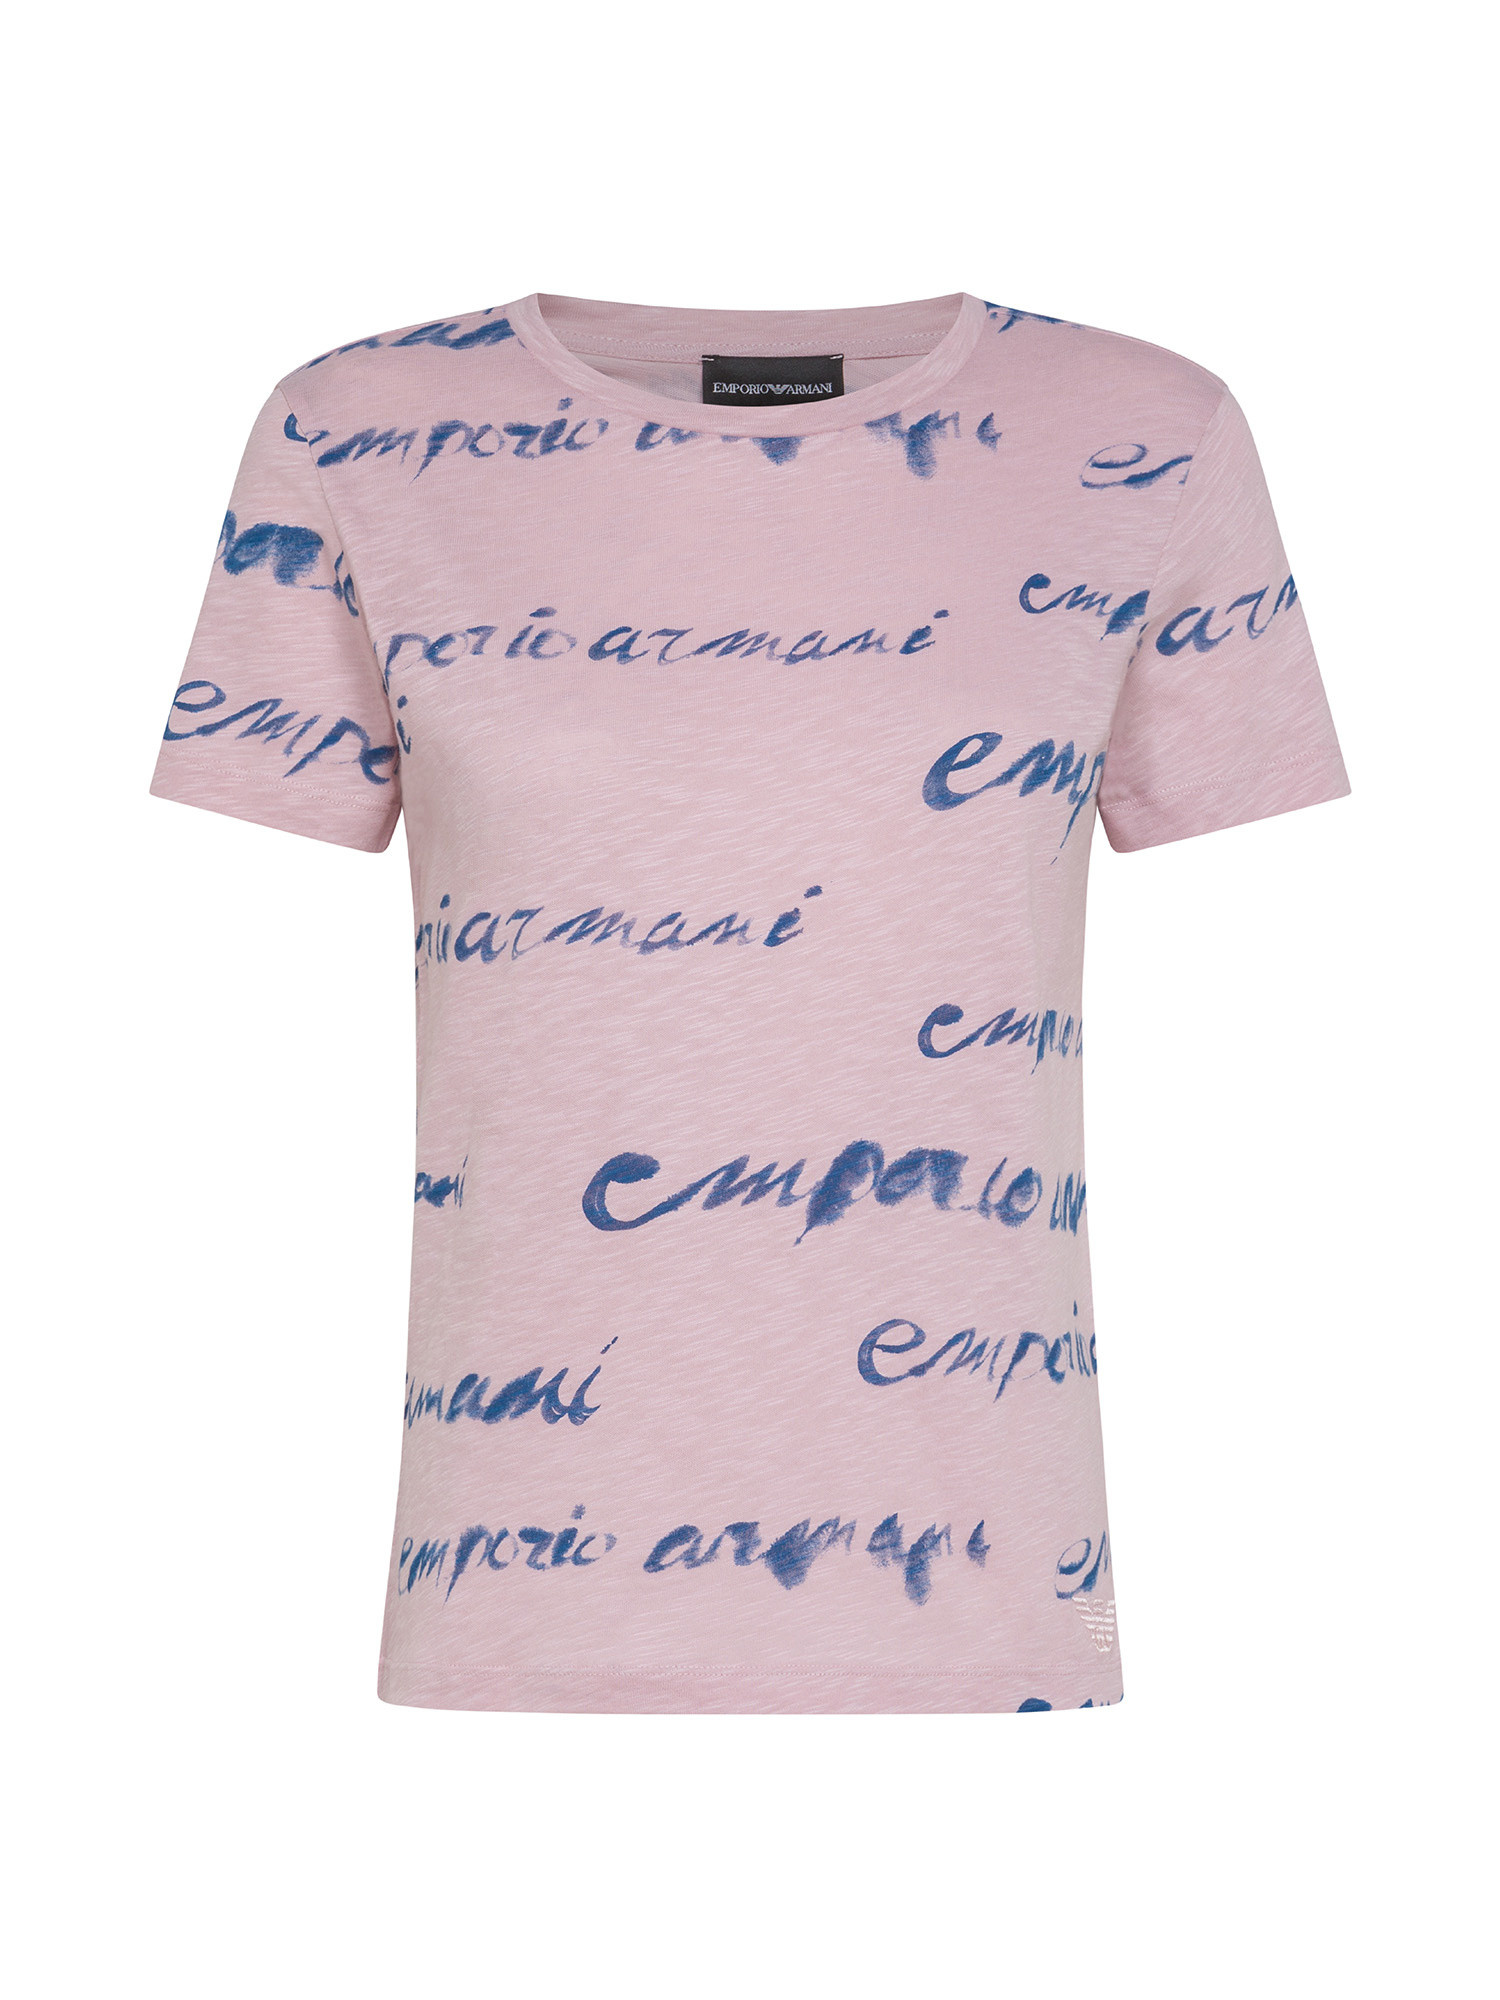 Emporio Armani - Cotton T-shirt with logo lettering, Pink, large image number 0